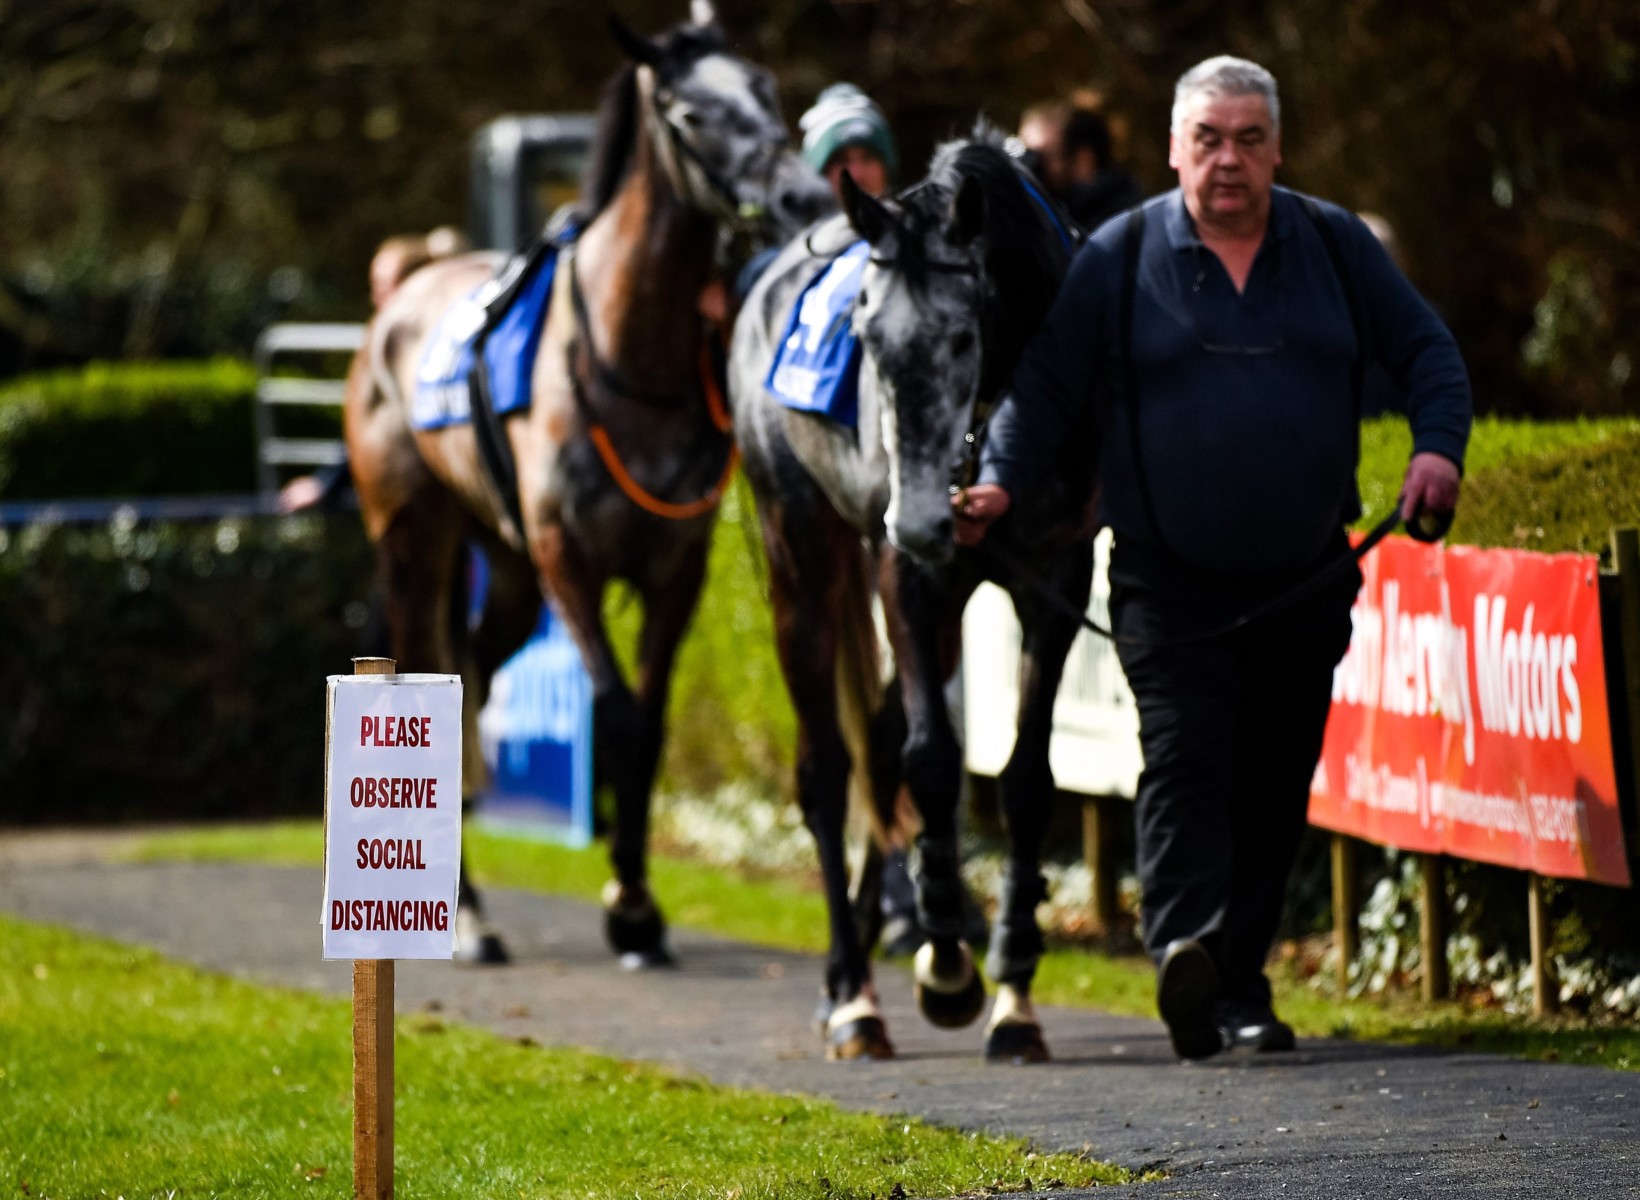 , Behind closed doors racing comes to an end in Ireland as government bans all sport until at least April 19